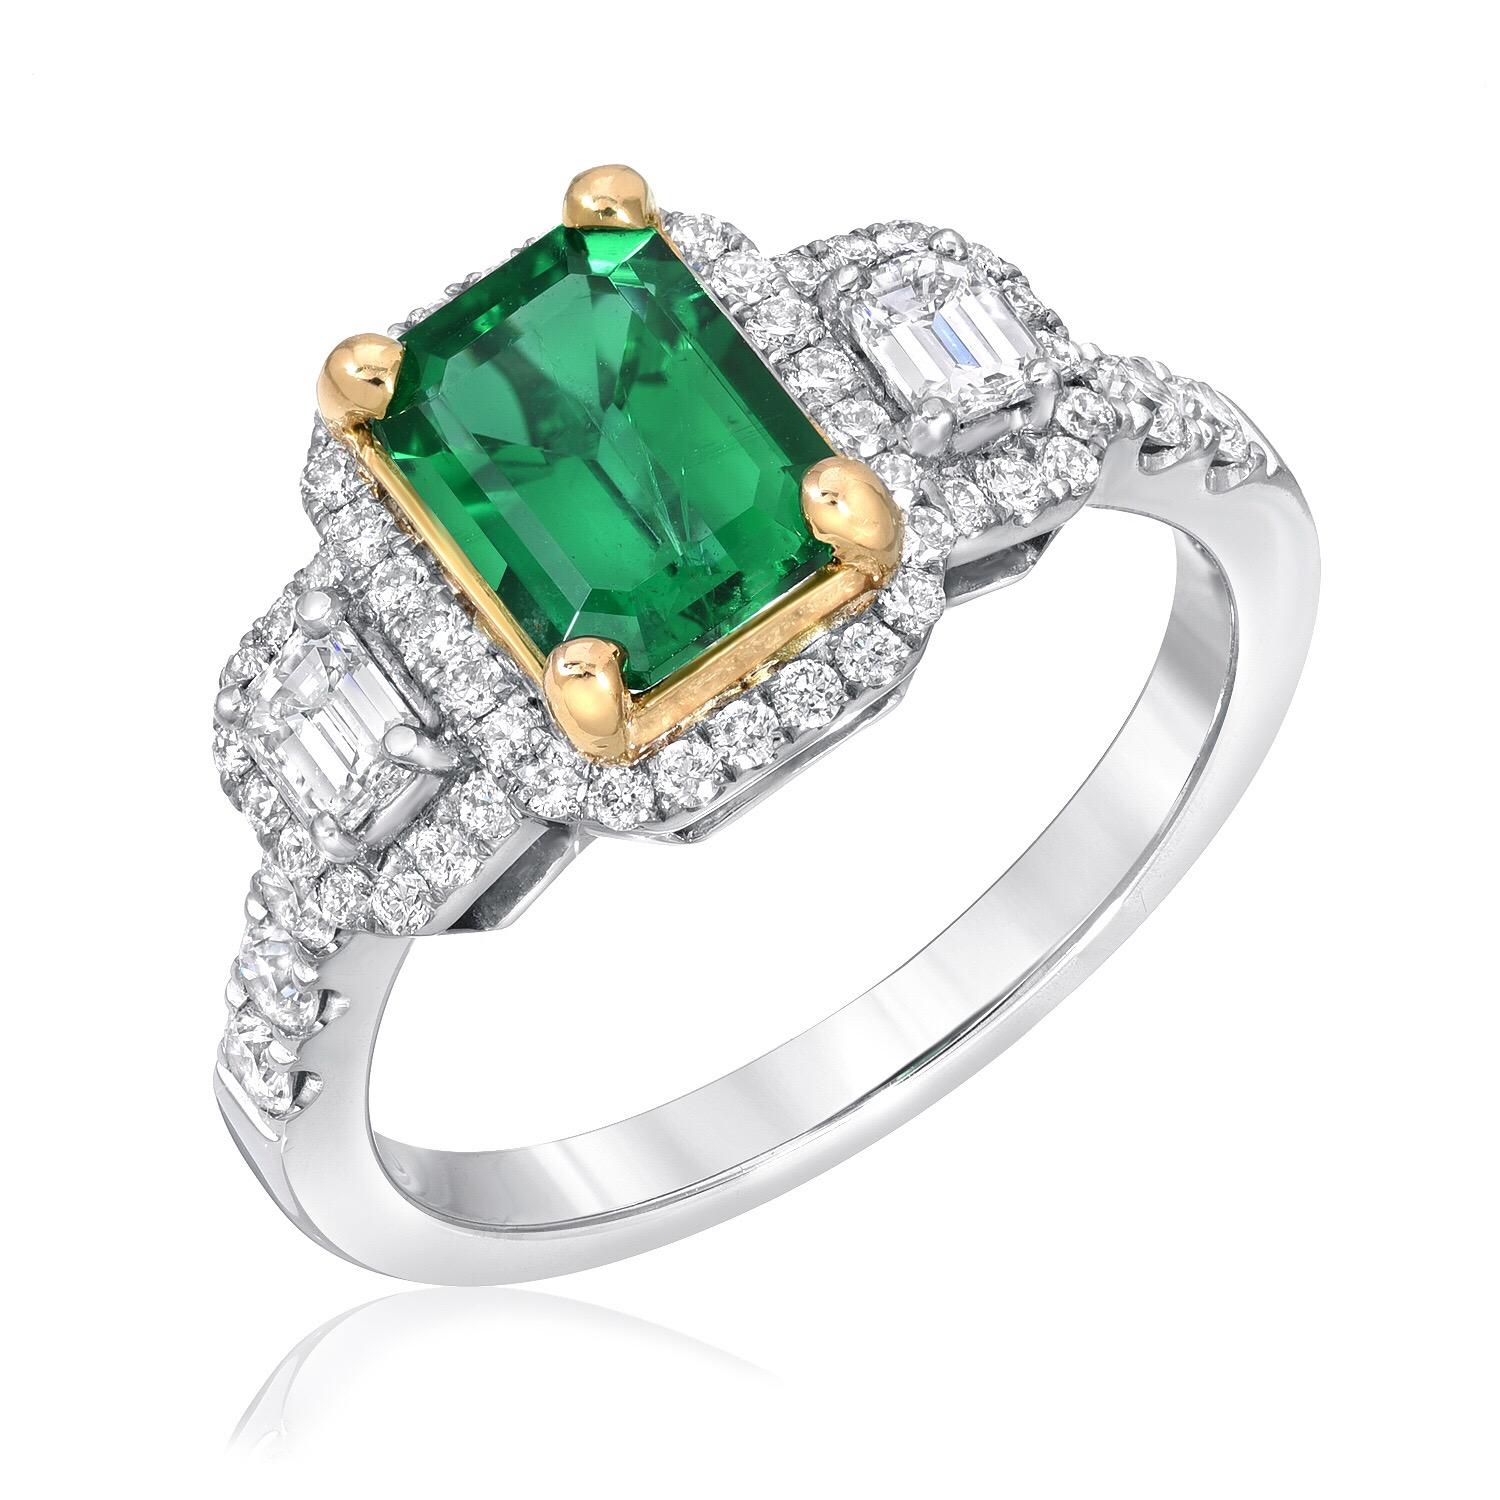 Emerald ring set with a 1.24 carat emerald cut, and a total of 0.74 carats of emerald cut diamonds and round brilliant diamonds. This three-stone Emerald ring is crafted in 18K white and yellow gold.
Emerald ring size 6.5. Resizing is complimentary